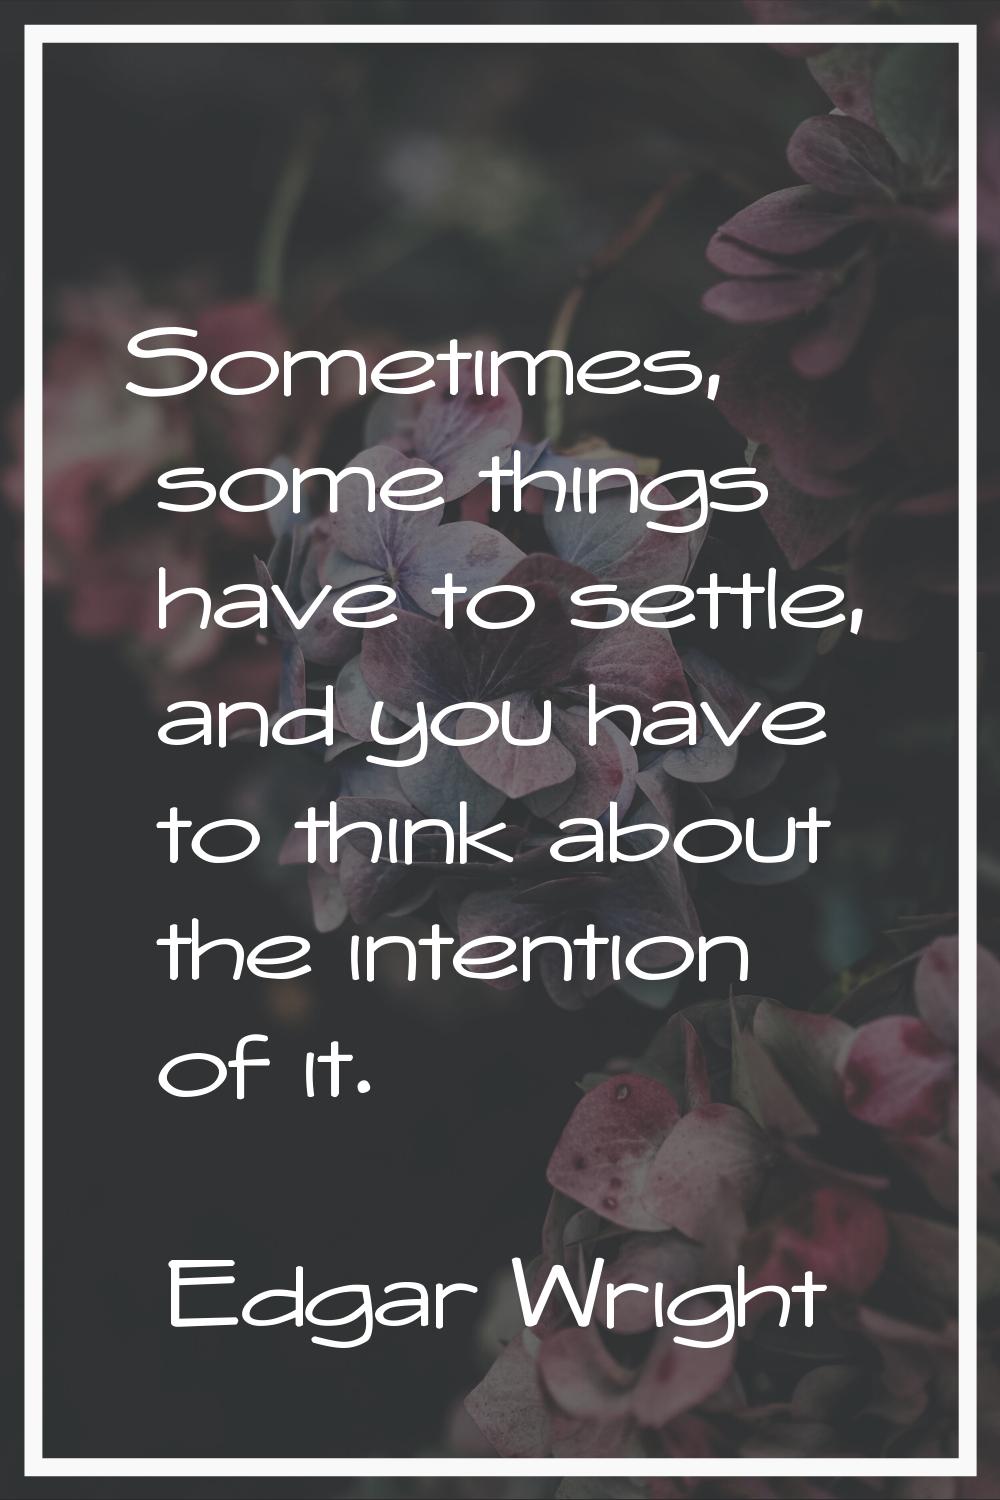 Sometimes, some things have to settle, and you have to think about the intention of it.